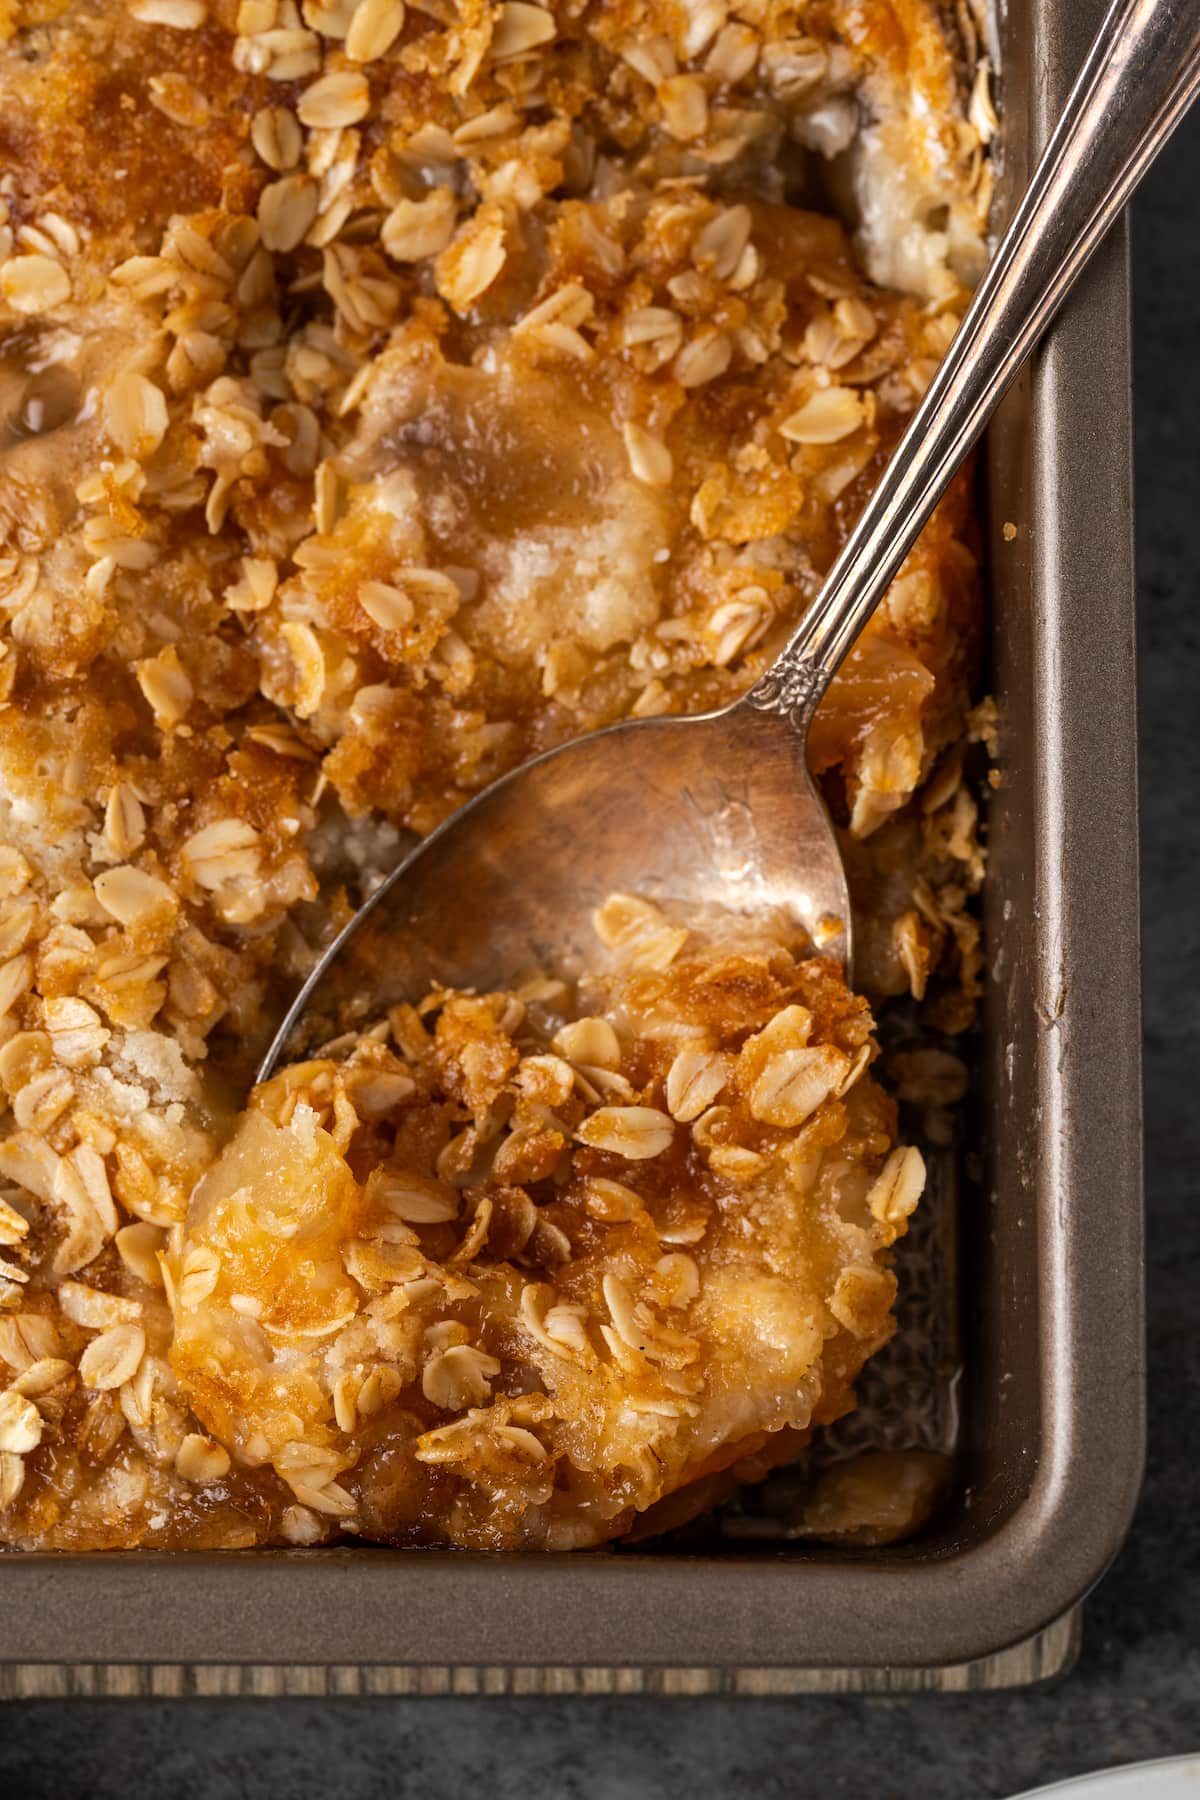 Overhead view of a spoon stuck into the corner of a baked apple dump cake in a baking pan.